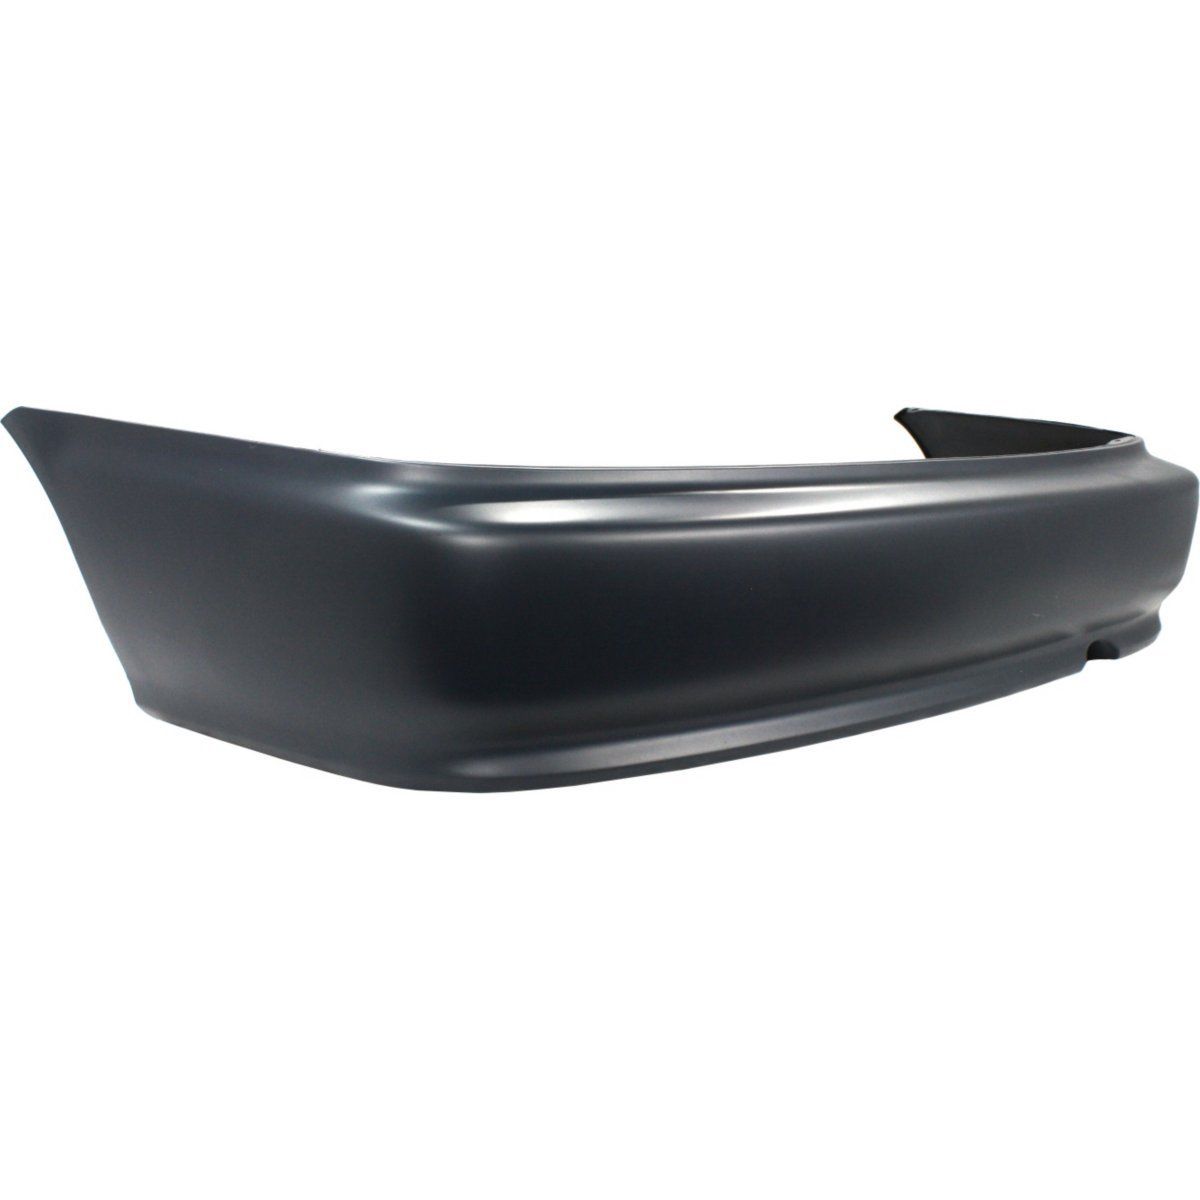 1999-2000 HONDA CIVIC Rear Bumper Cover 2dr coupe/4dr sedan  USA/Canada built Painted to Match